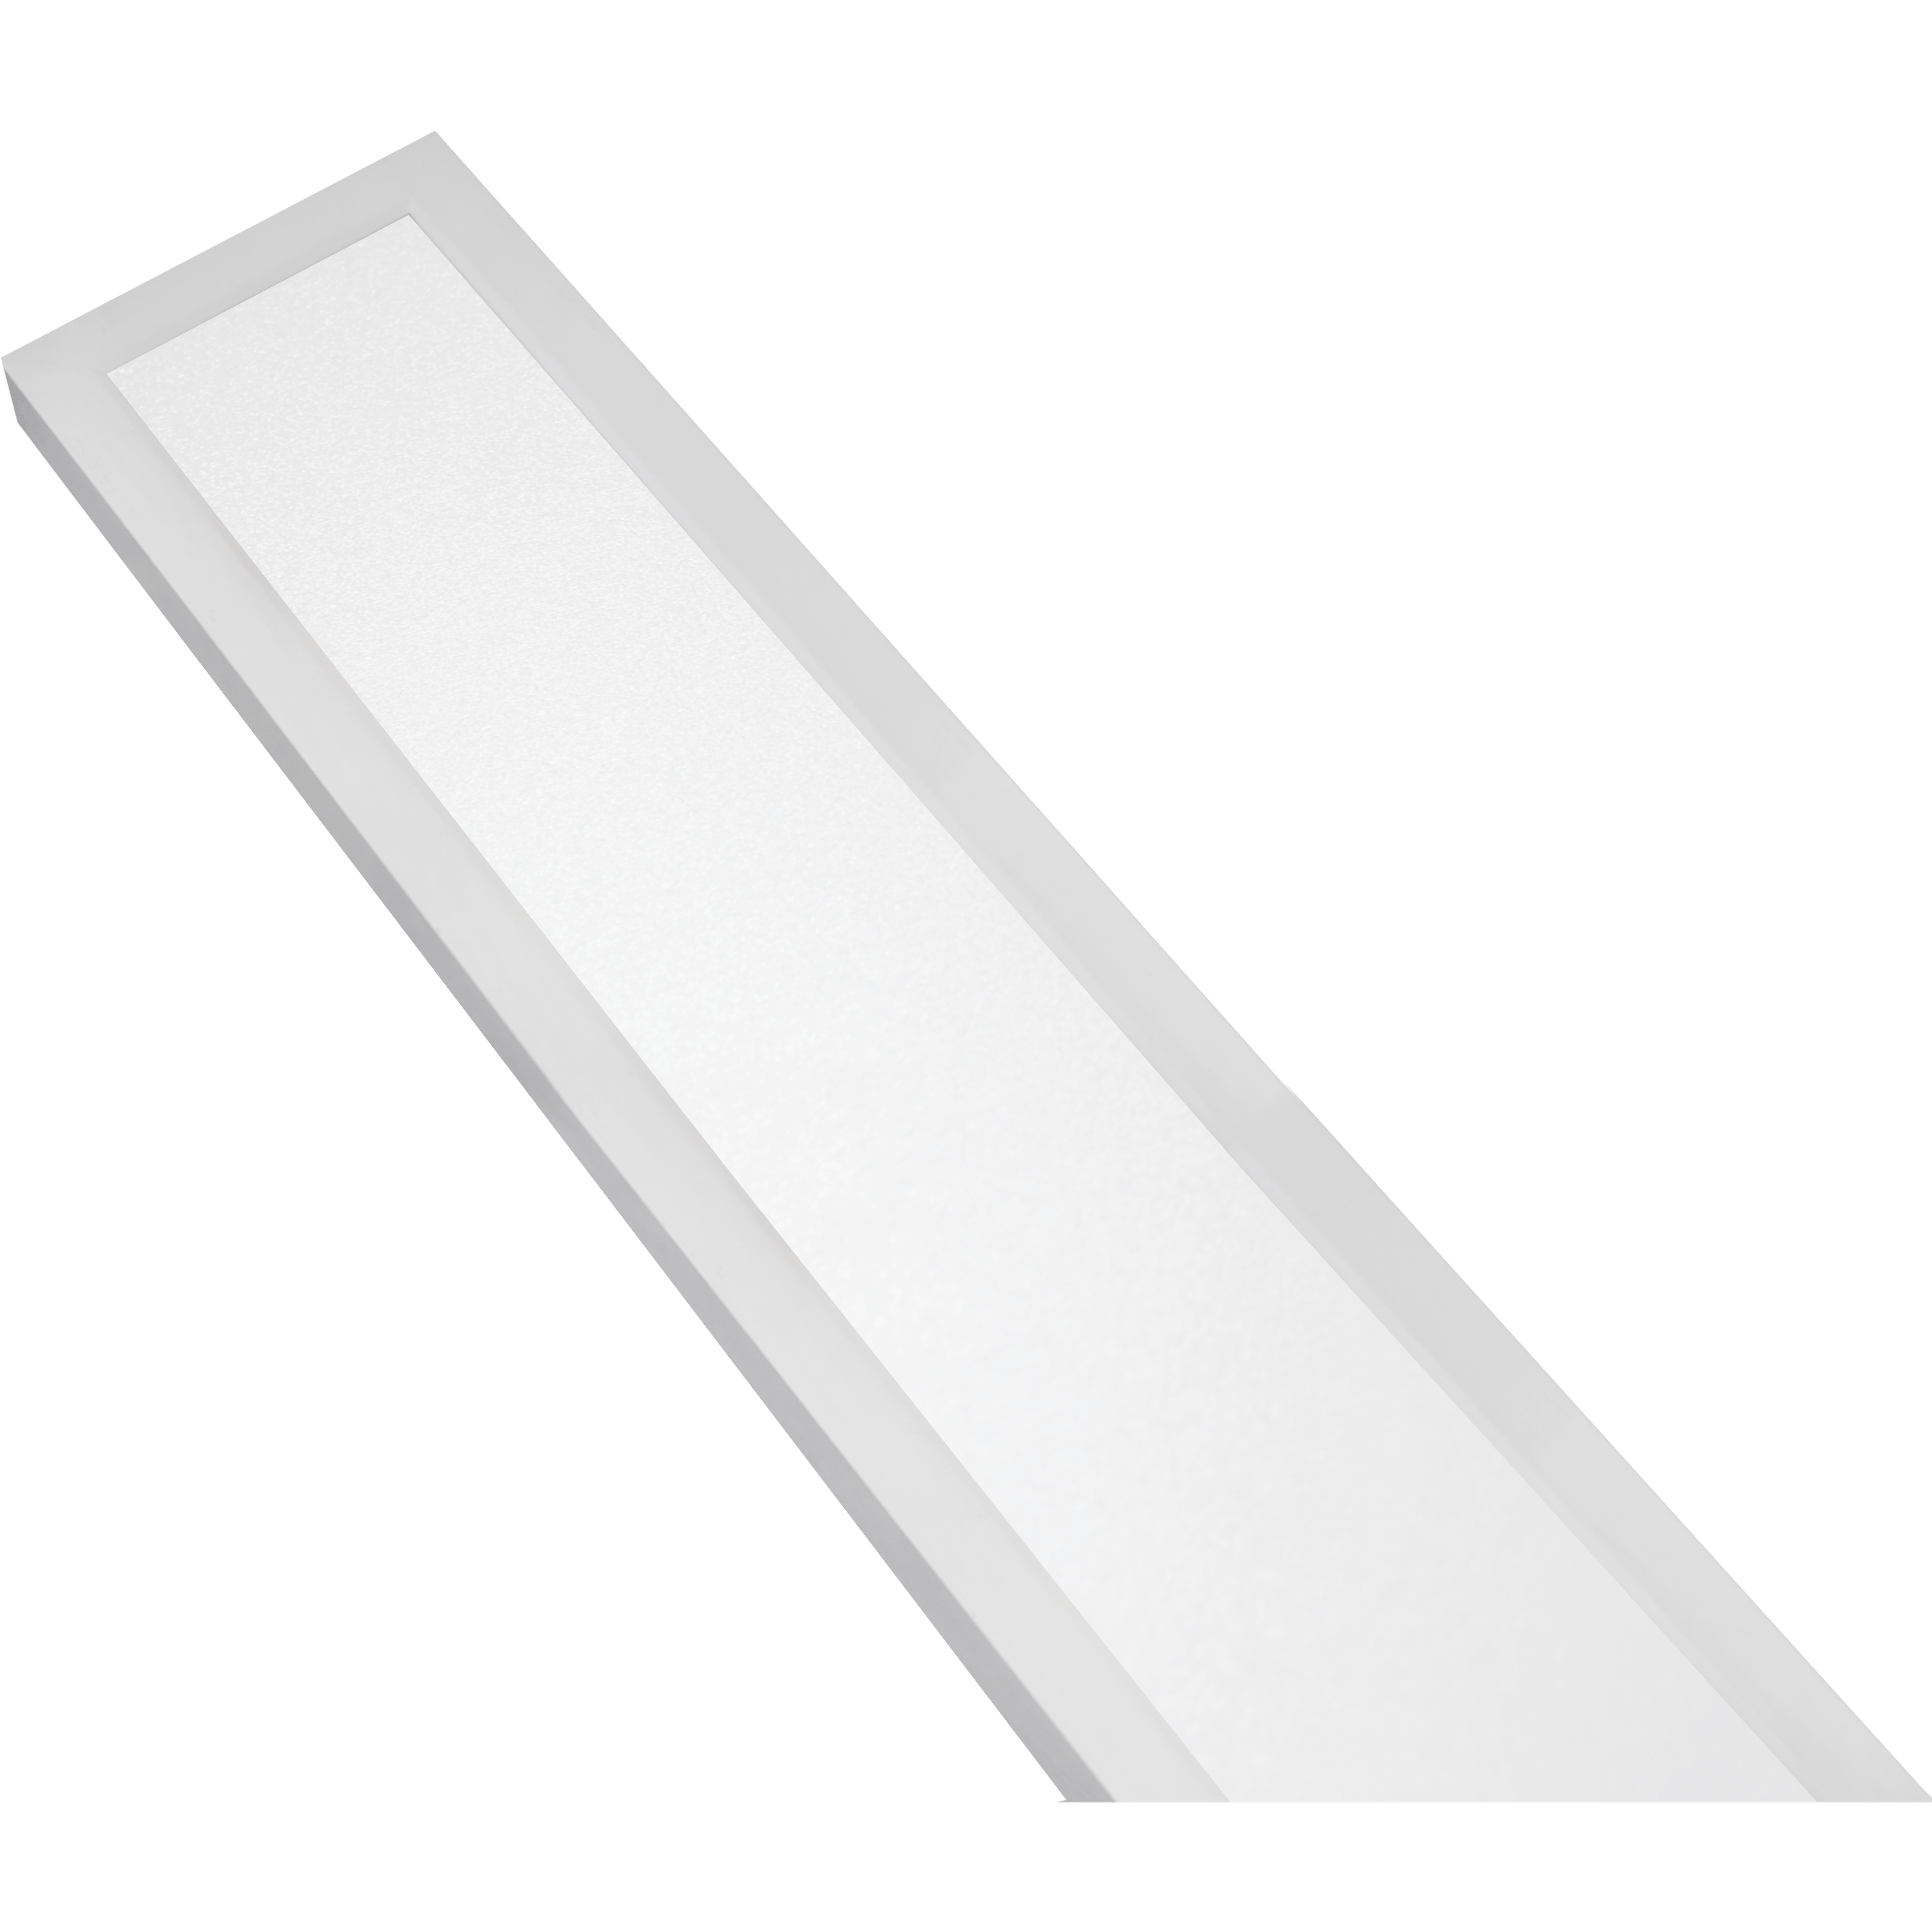 POE Texas Lighting Denton Linear Recessed PoE Lights - 6 in x 8 ft (Recessed)